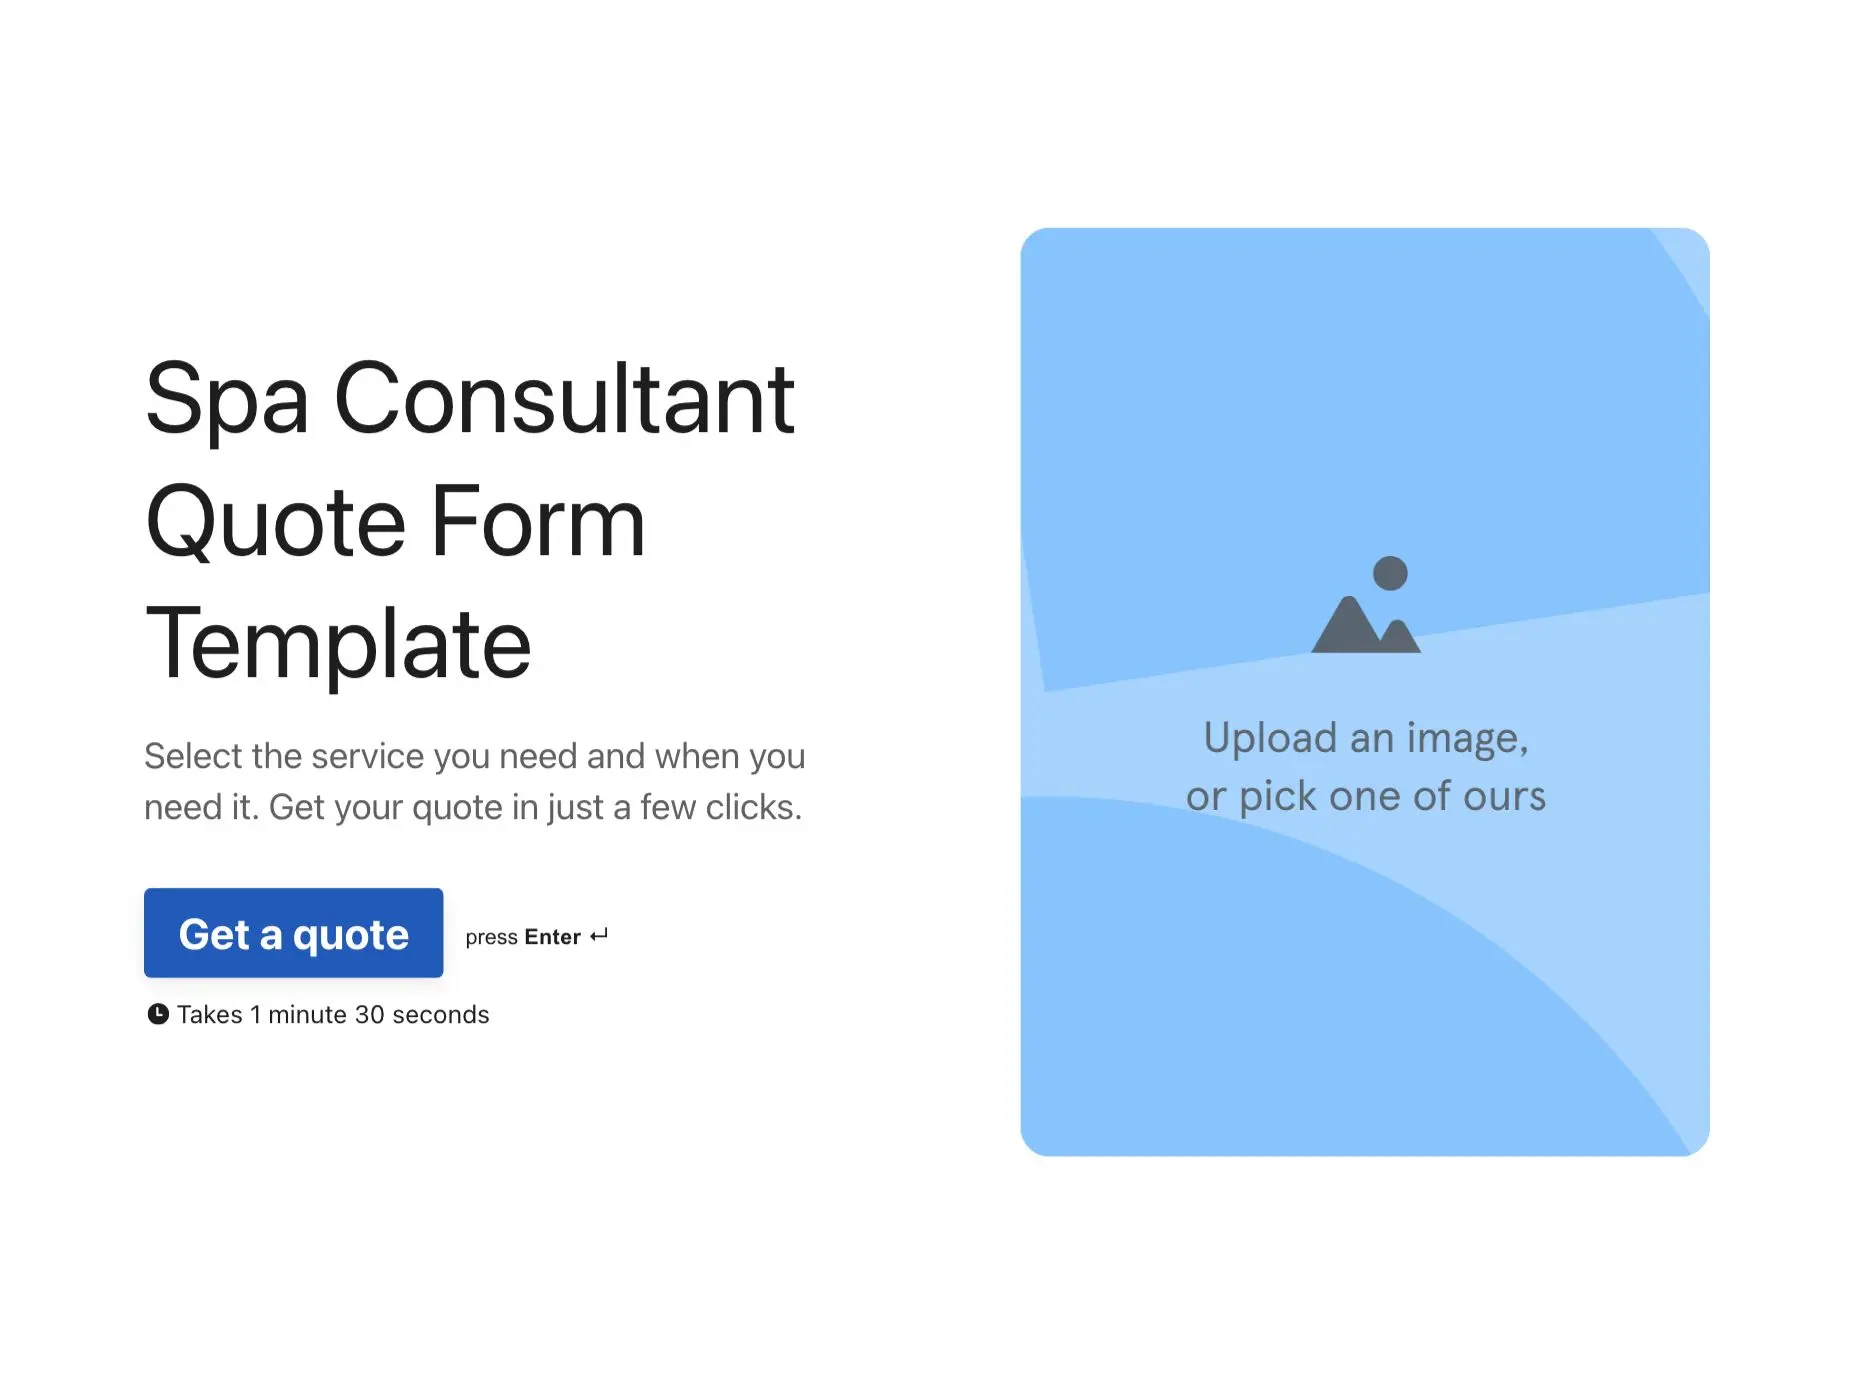 Spa Consultant Quote Form Template Hero